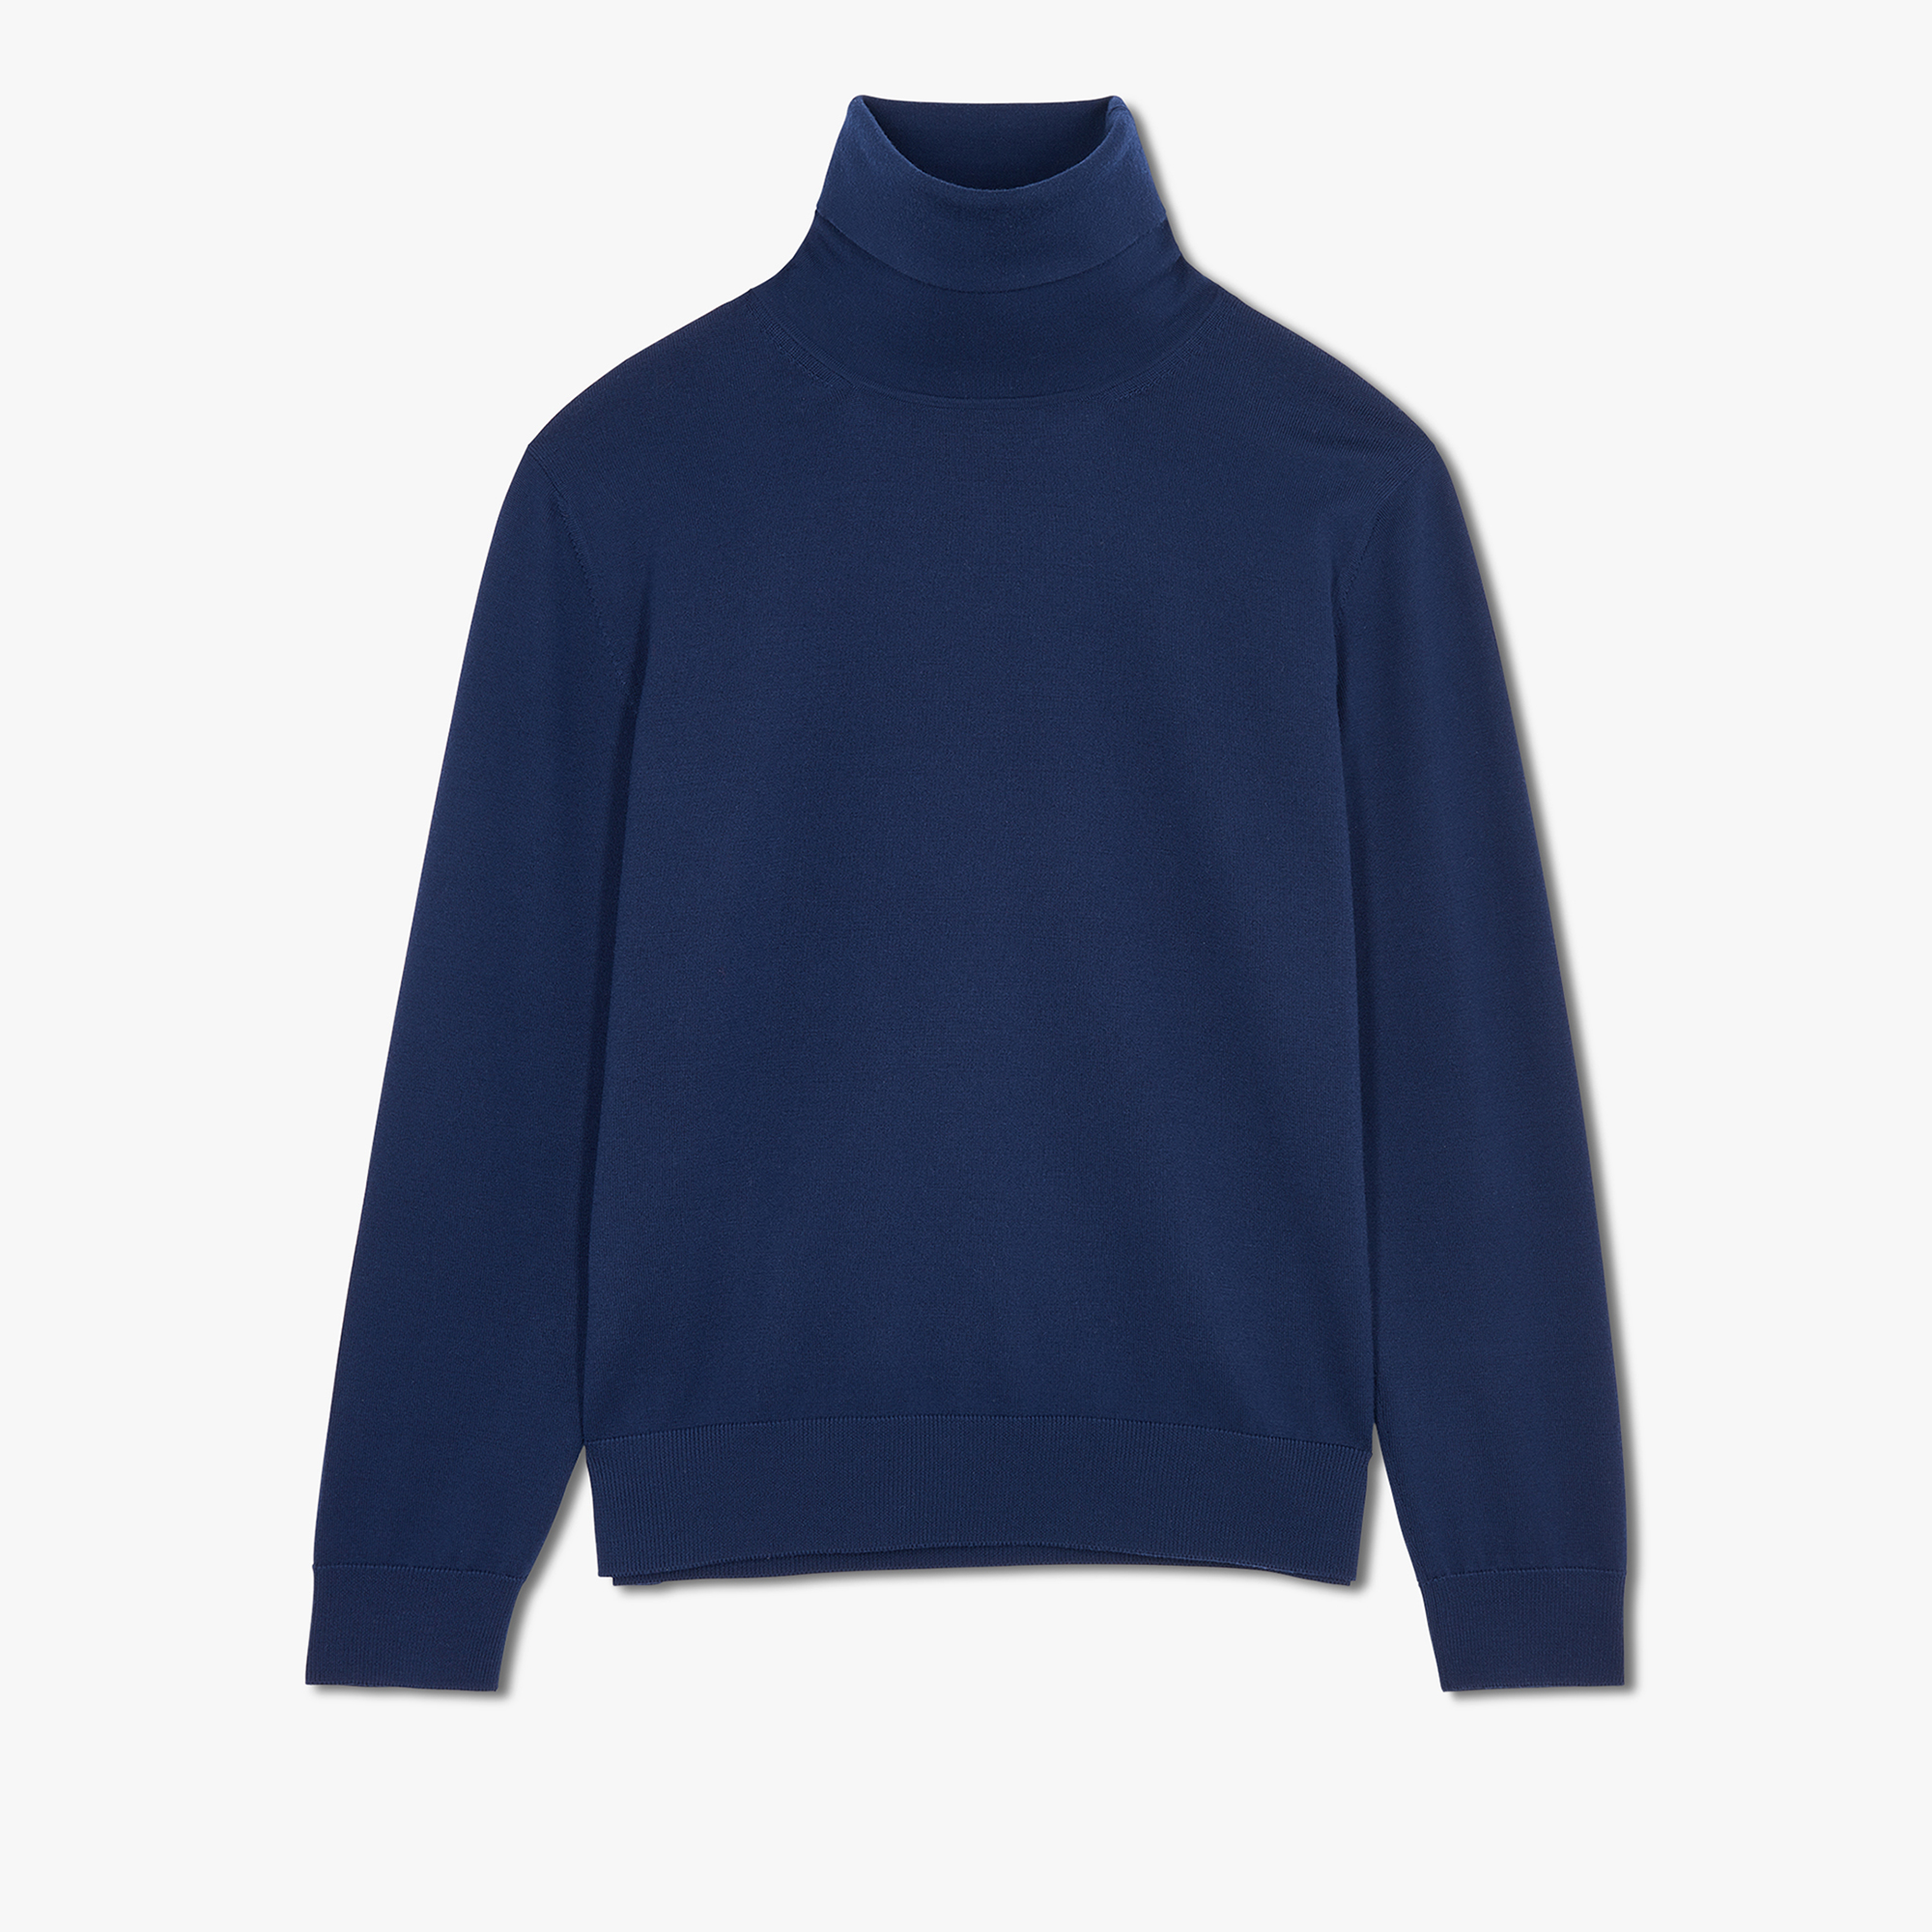 Wool Turtleneck With Leather Detail, WARM BLUE, hi-res